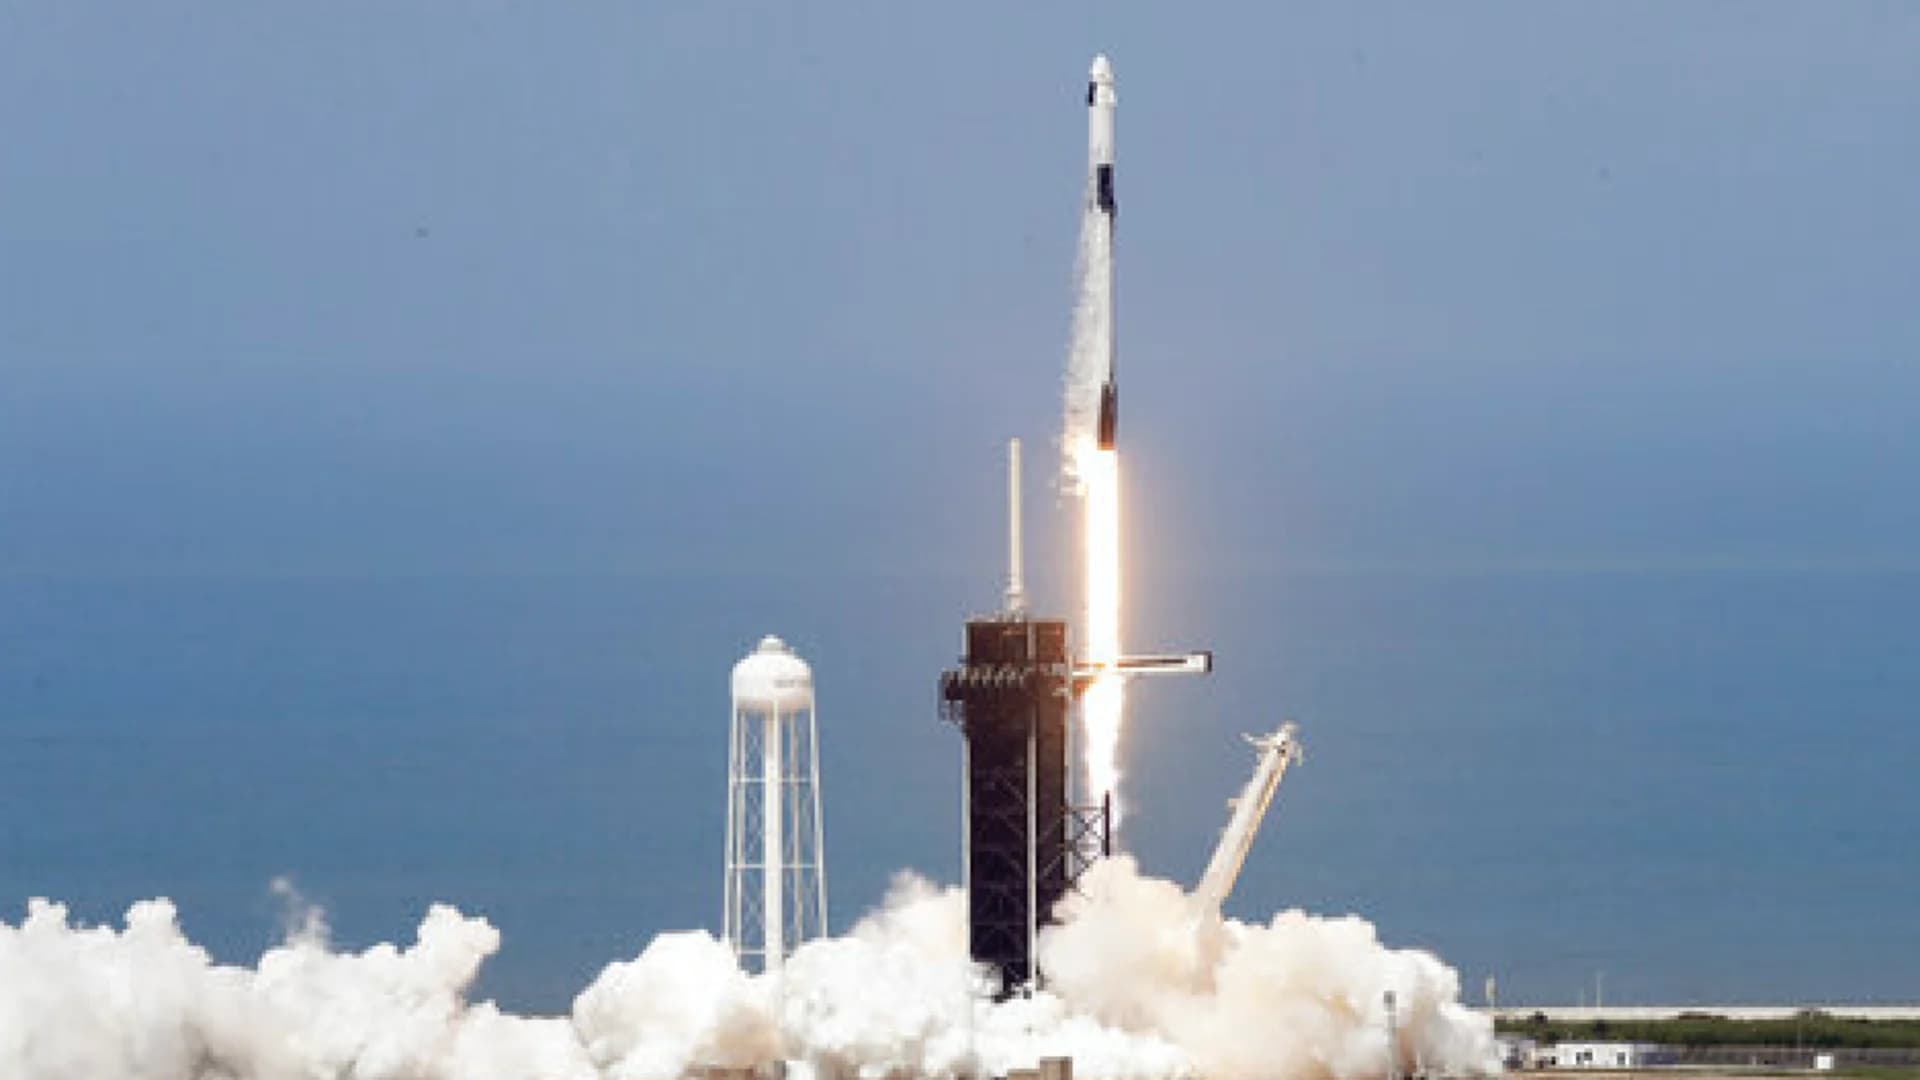 SpaceX rocket ship lifts off with 2 Americans